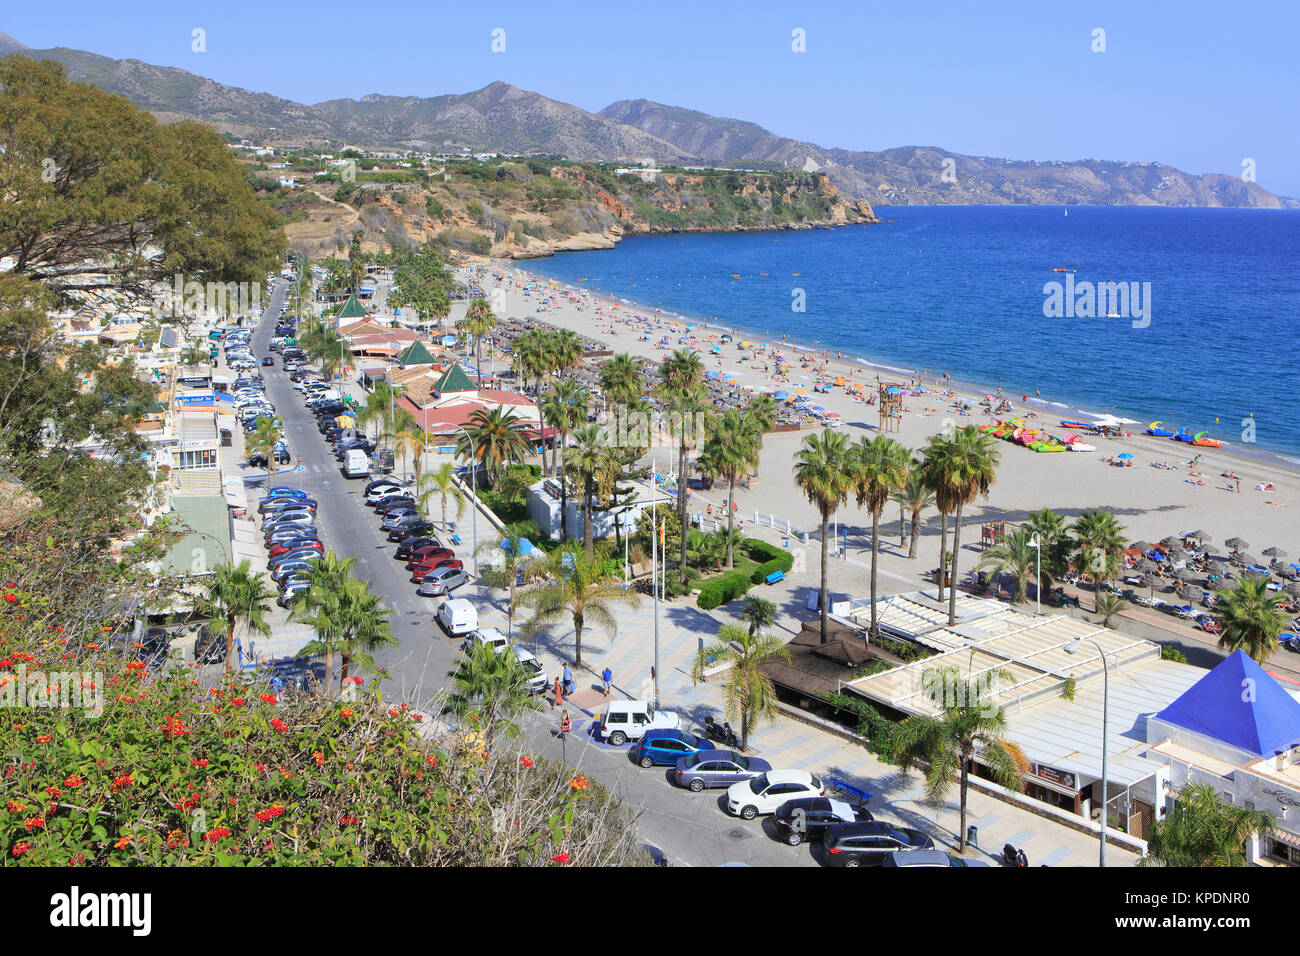 Panoramic view over Burriana Beach (Playa de Burriana) in Nerja on the Costa del Sol in the province of Malaga, Spain Stock Photo